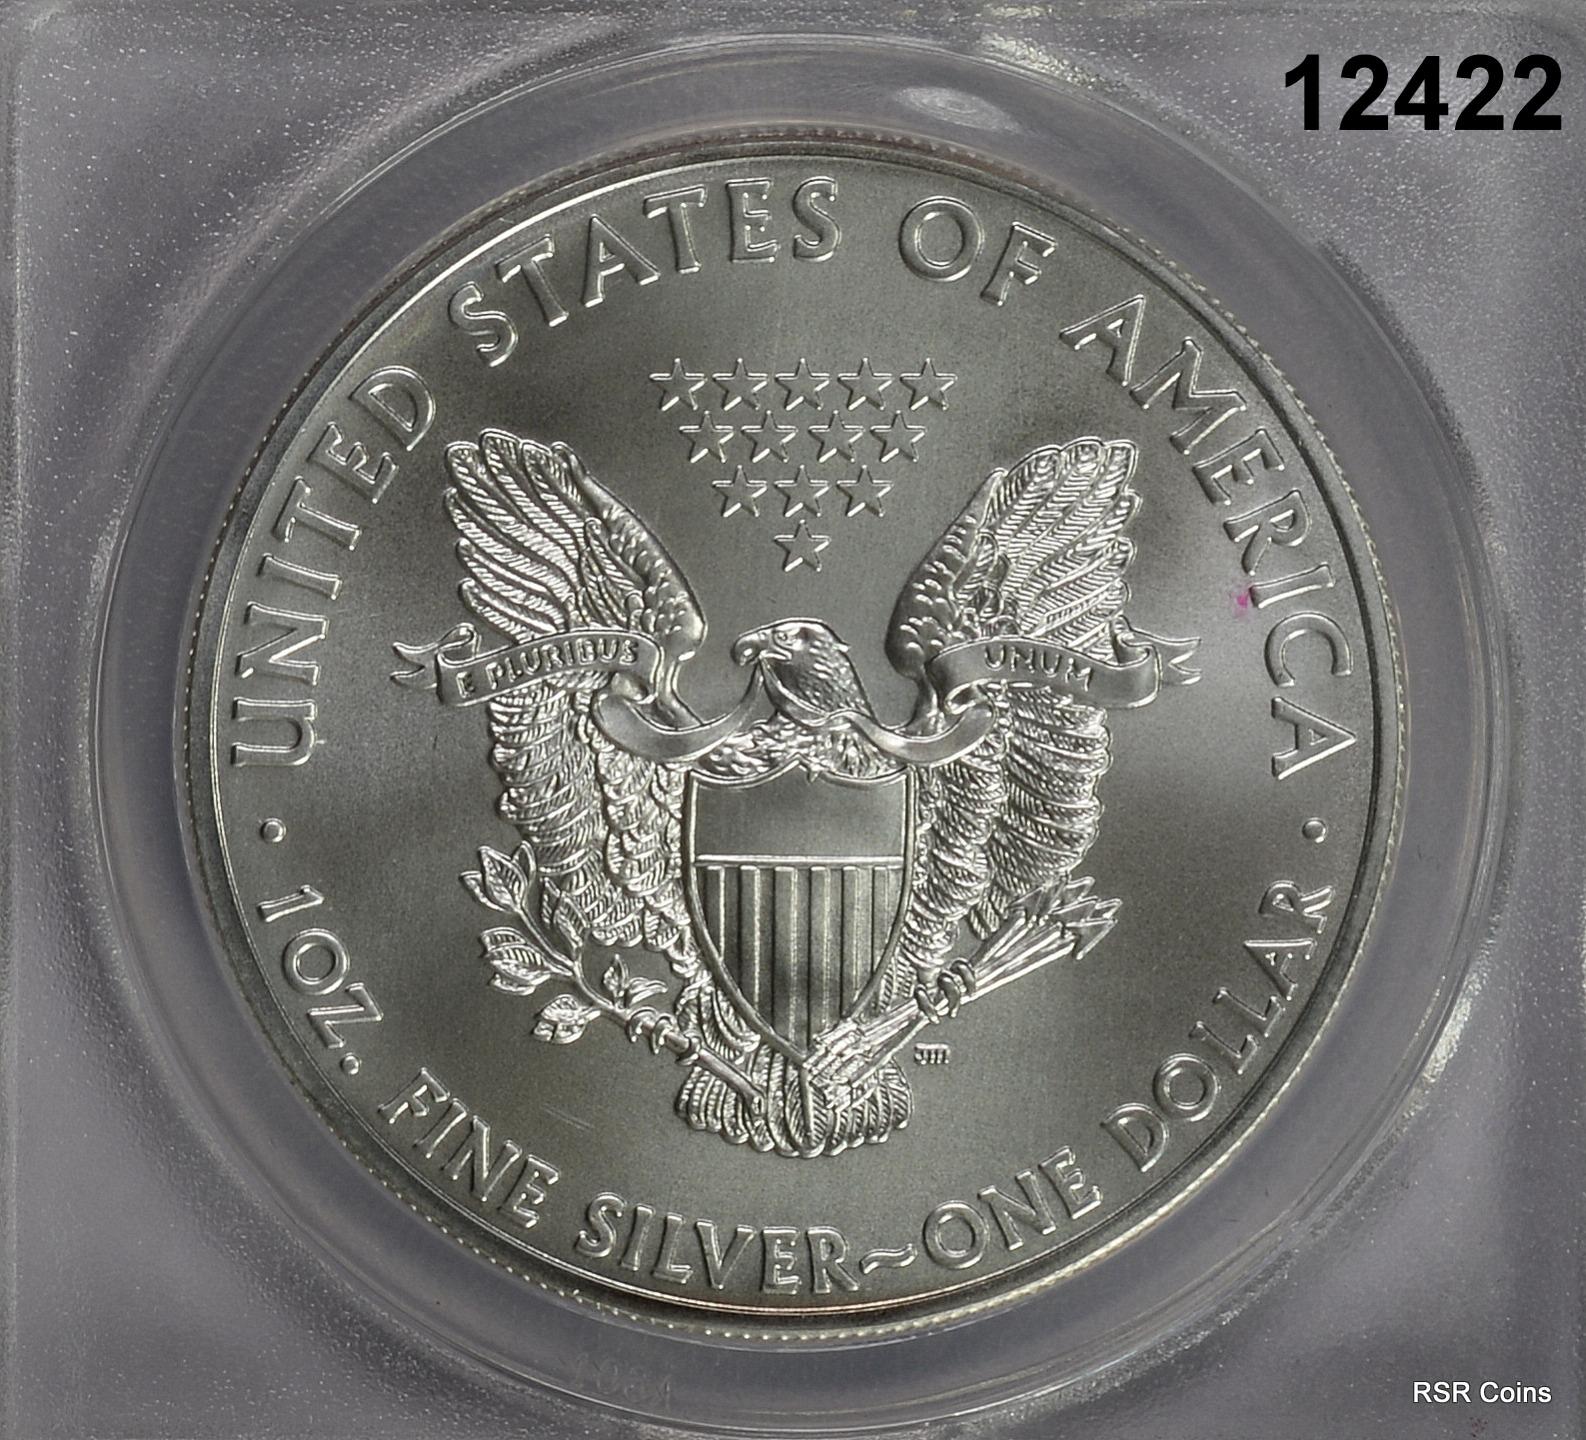 2015 P SILVER EAGLE STRUCK AT THE PHILIDELPHIA MINT ANACS CERTIFIED MS69 #12422